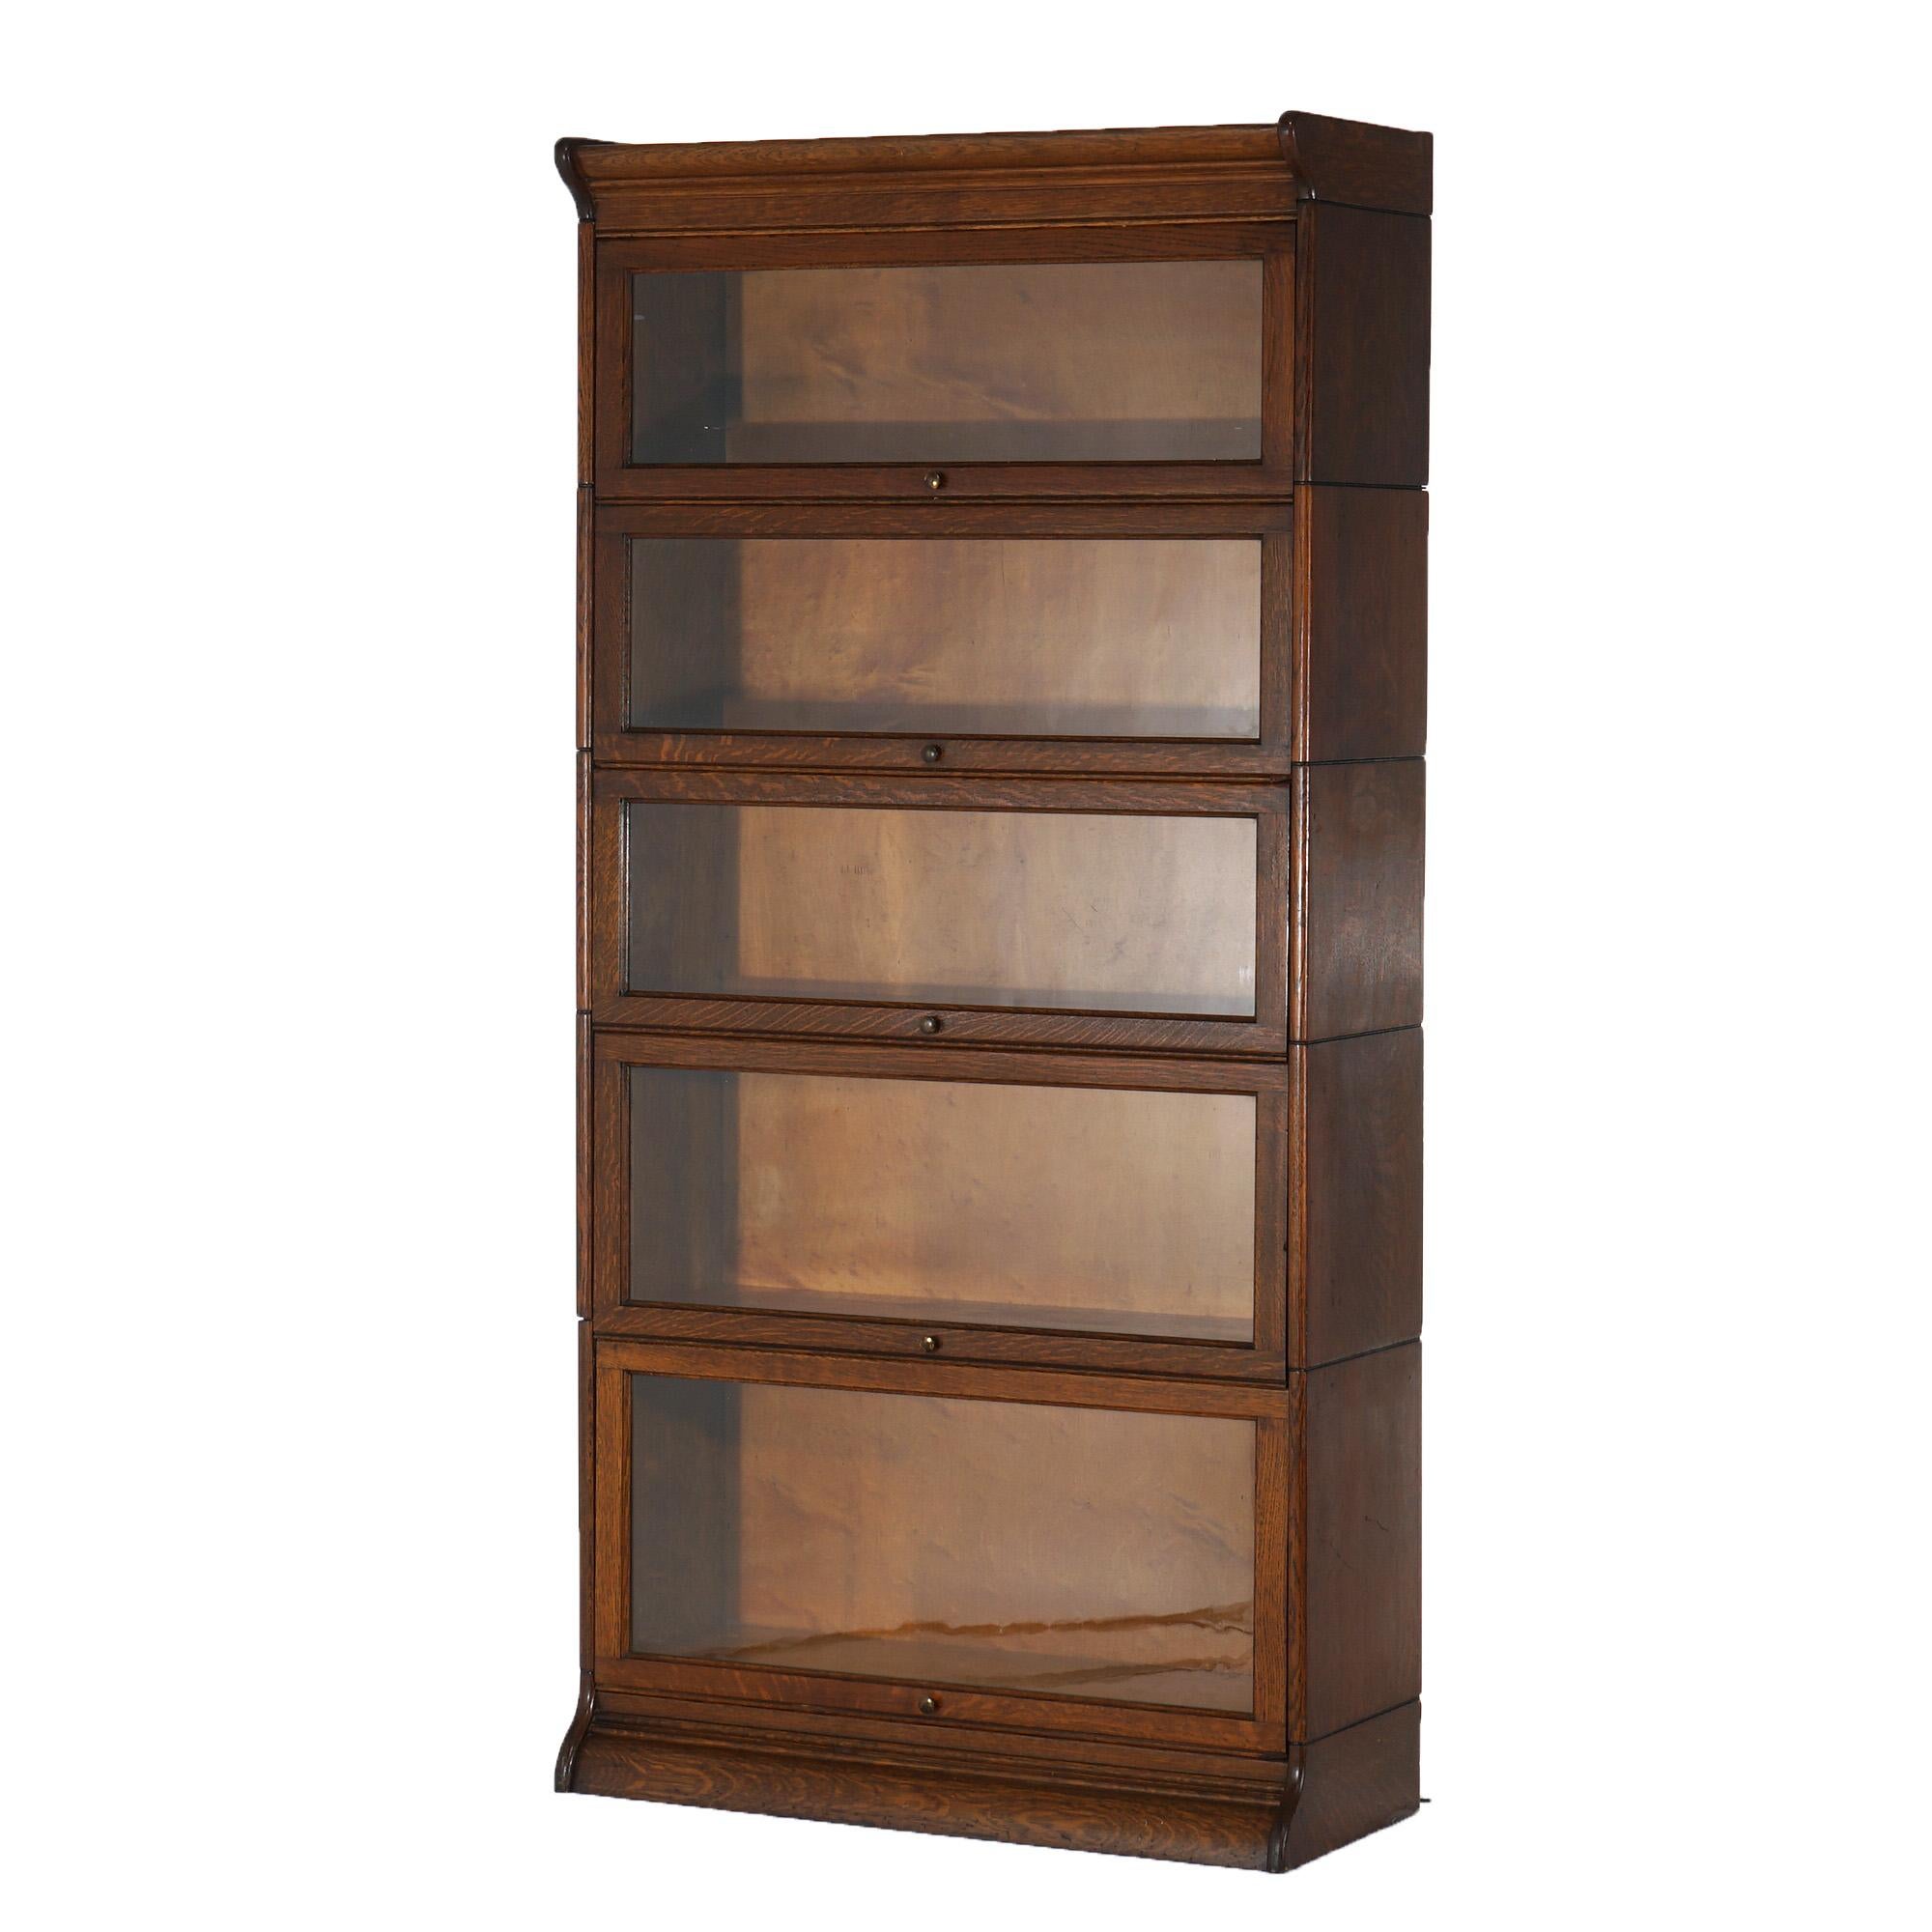 ***Ask About Reduced In-House Shipping Rates - Reliable Service & Fully Insured***

An antique Arts and Crafts Mission barrister bookcase offers quarter sawn oak construction with five stacks, each having pull-out glass doors, raised on ogee base,